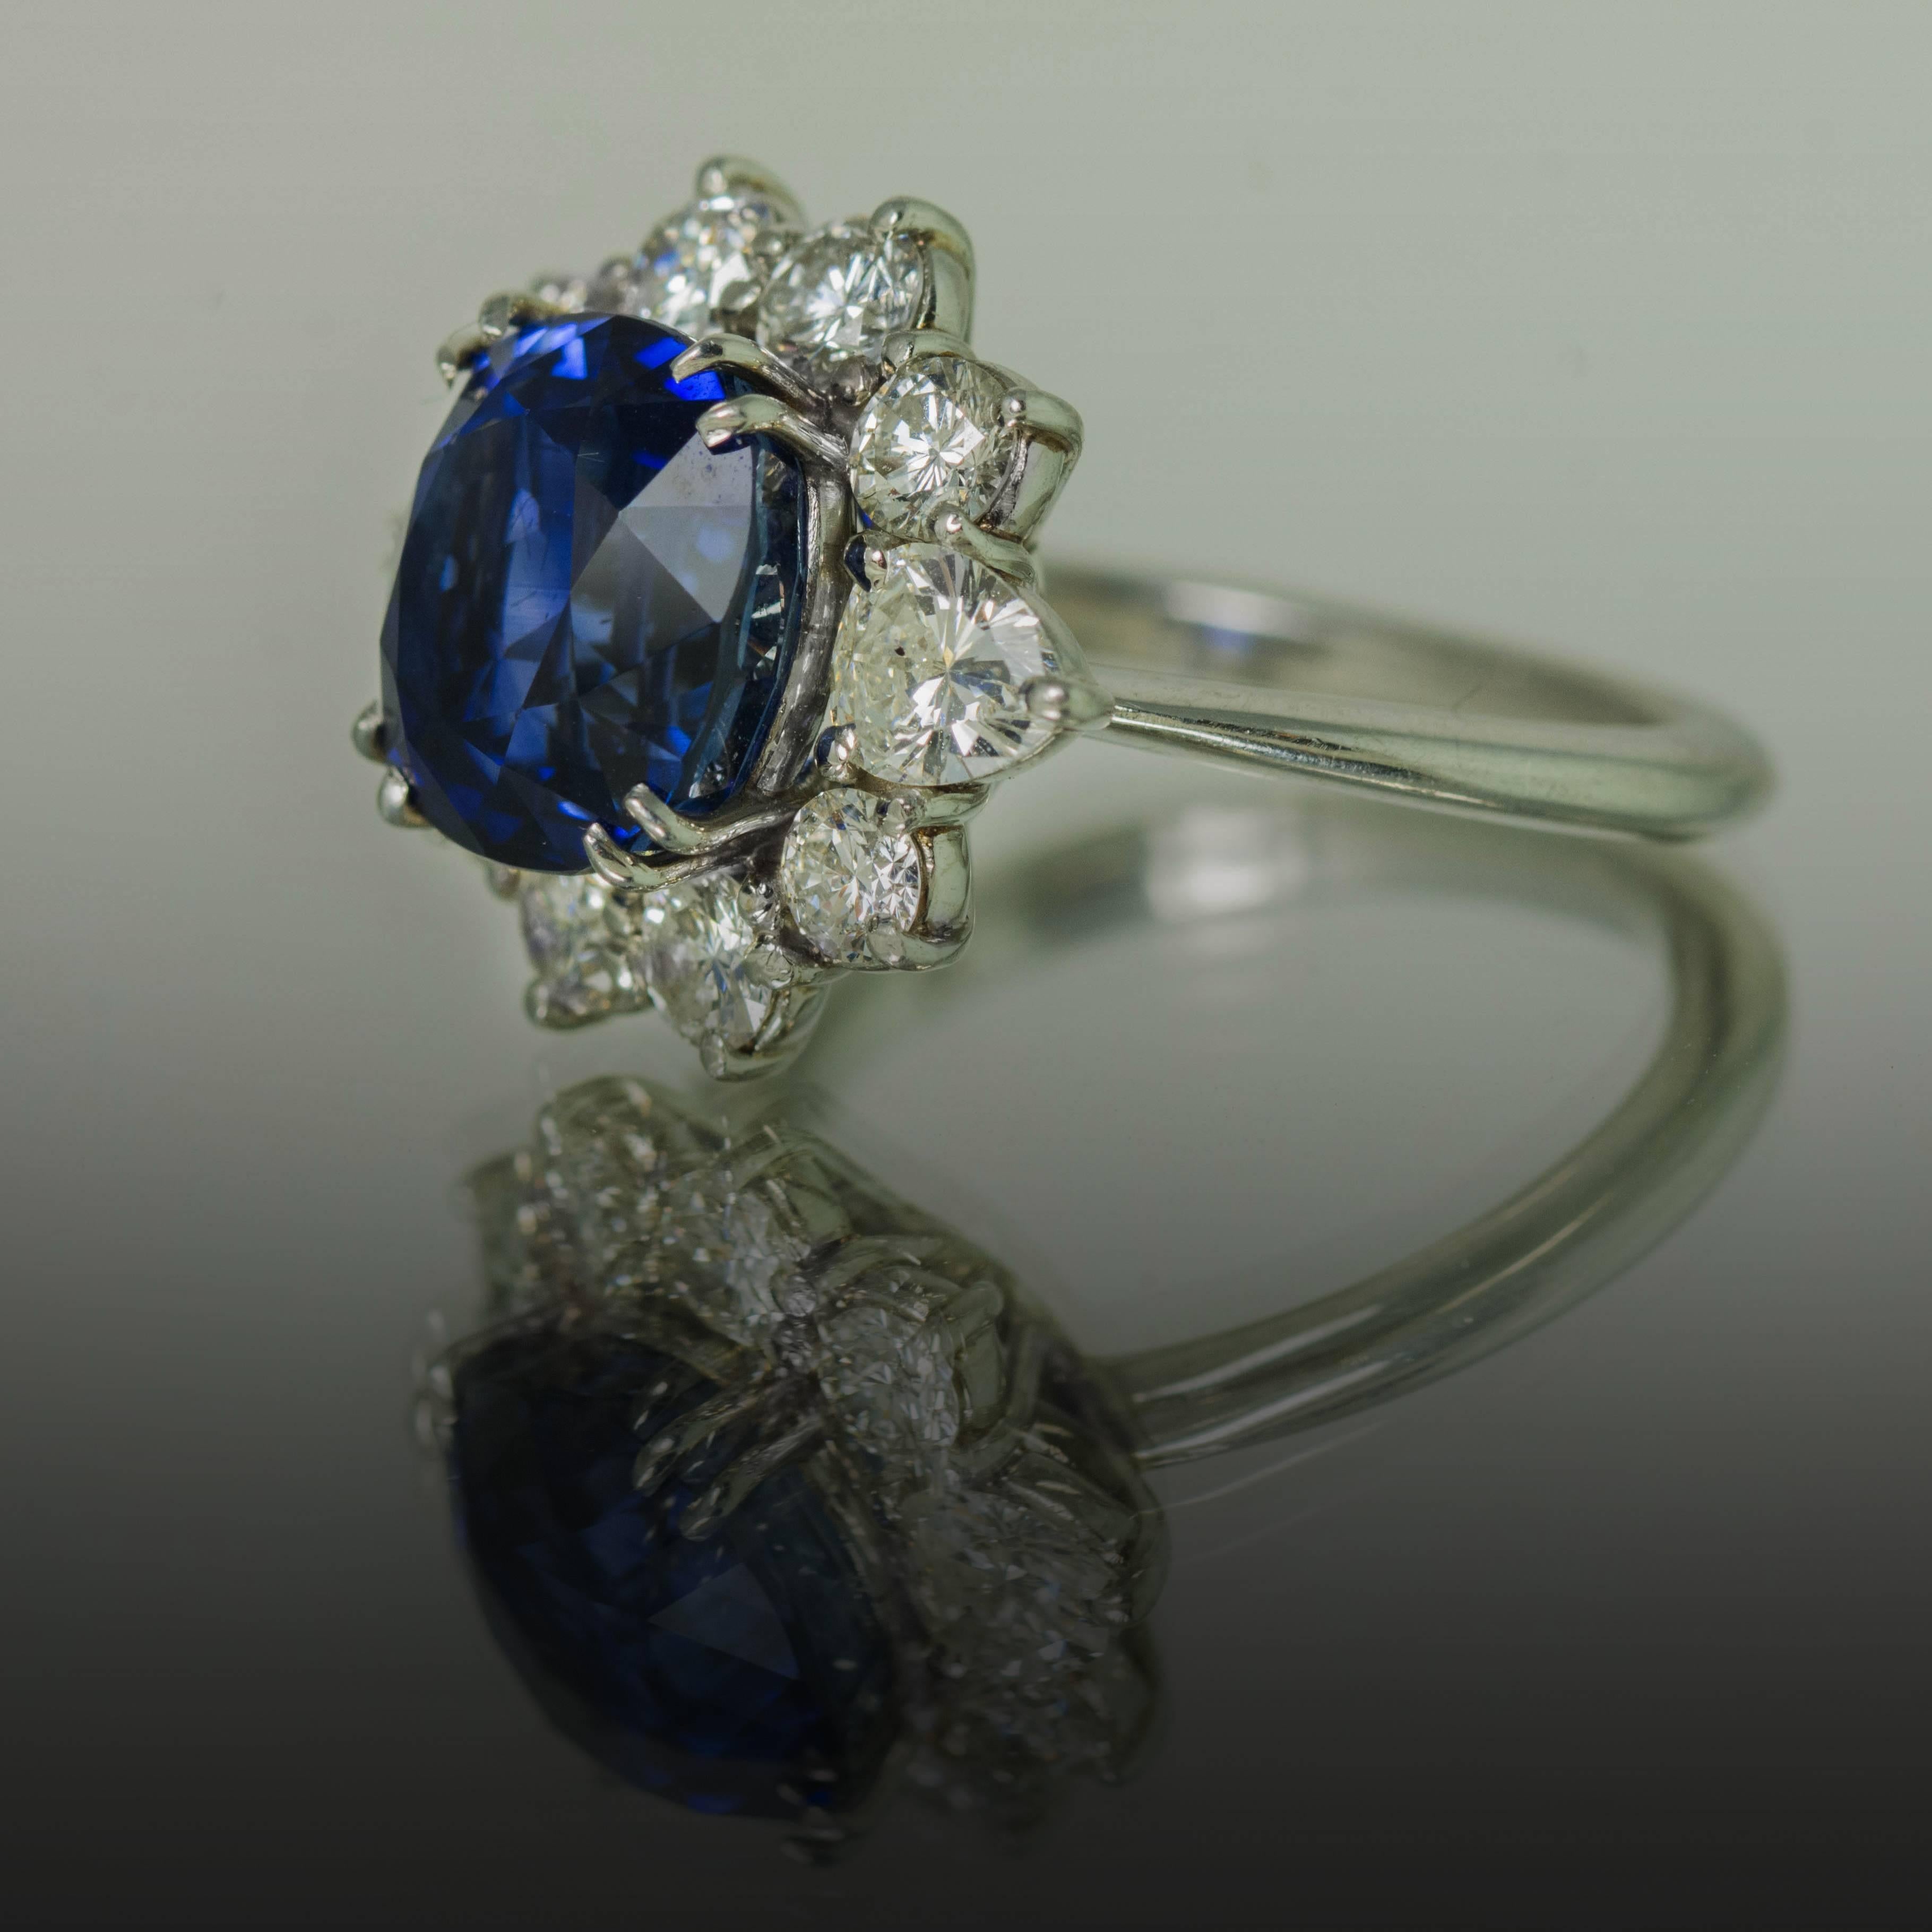 Platinum Ring with Royal Blue Sapphire weighing 5.78 carats and accompanied by an American Gem Labs certificate. In addition there are 8 round brilliant and 2 pear shape diamonds weighing 1.31 carats. 